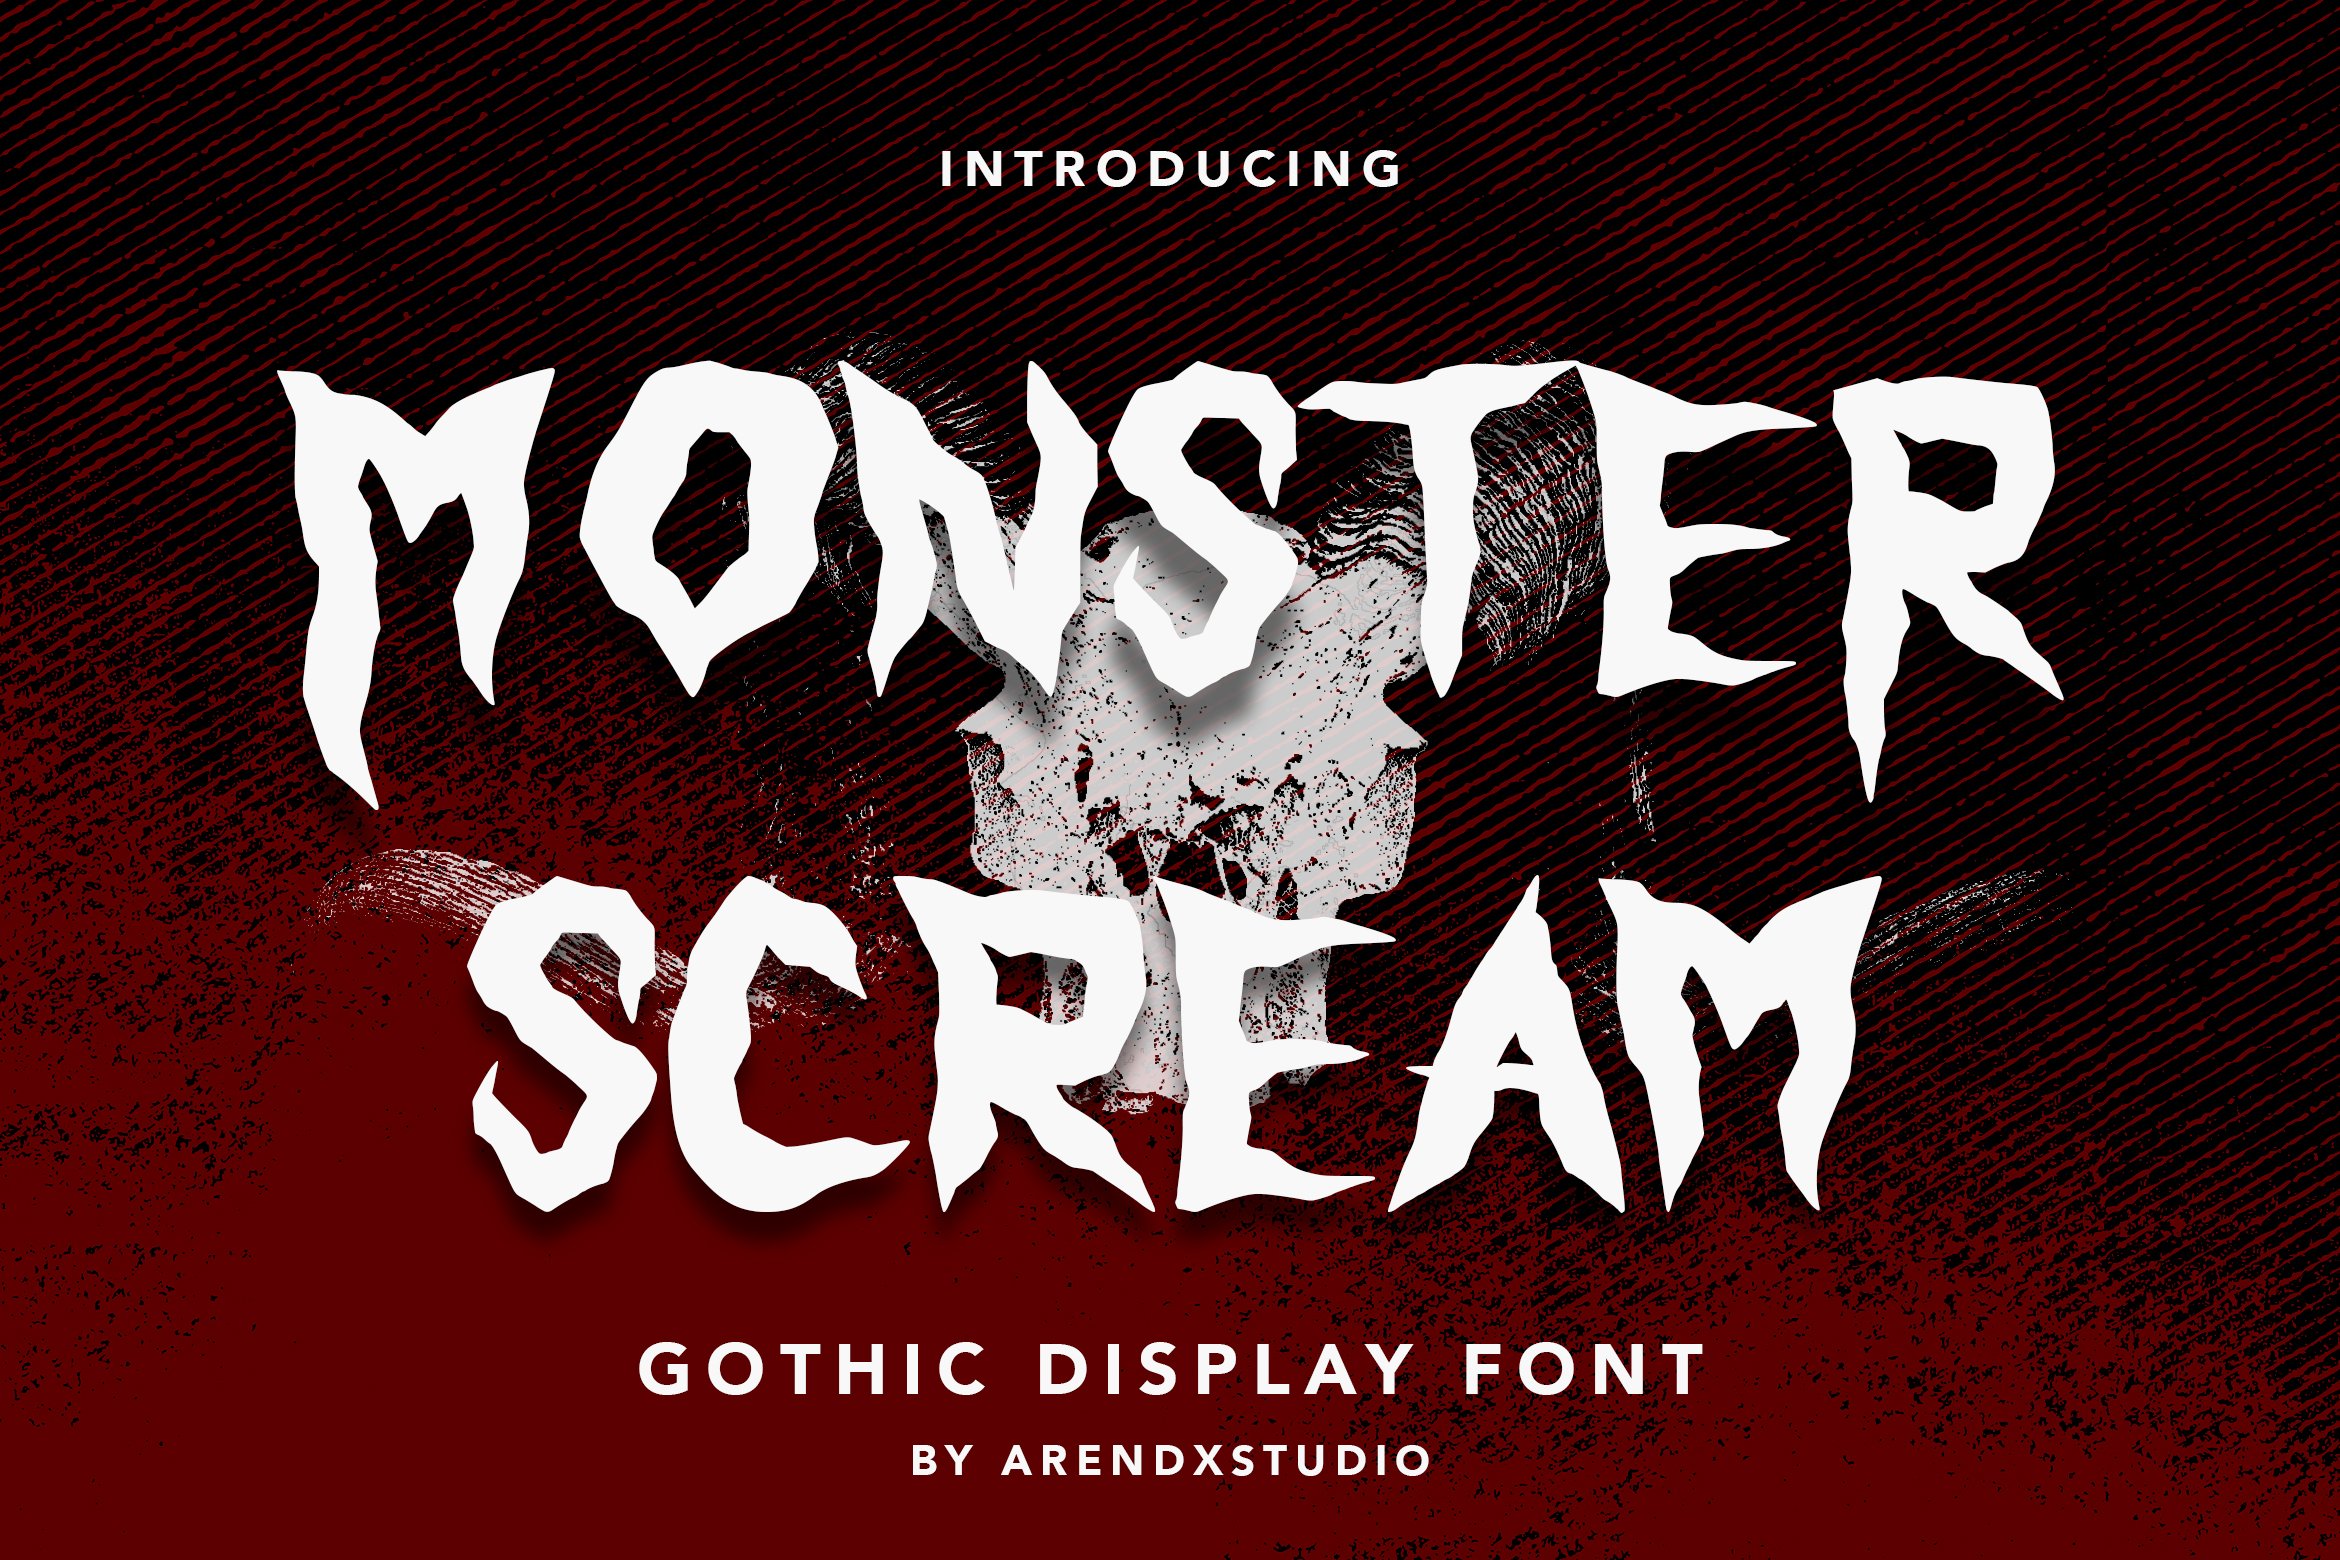 Monster Scream - Gothic Display Font cover image.